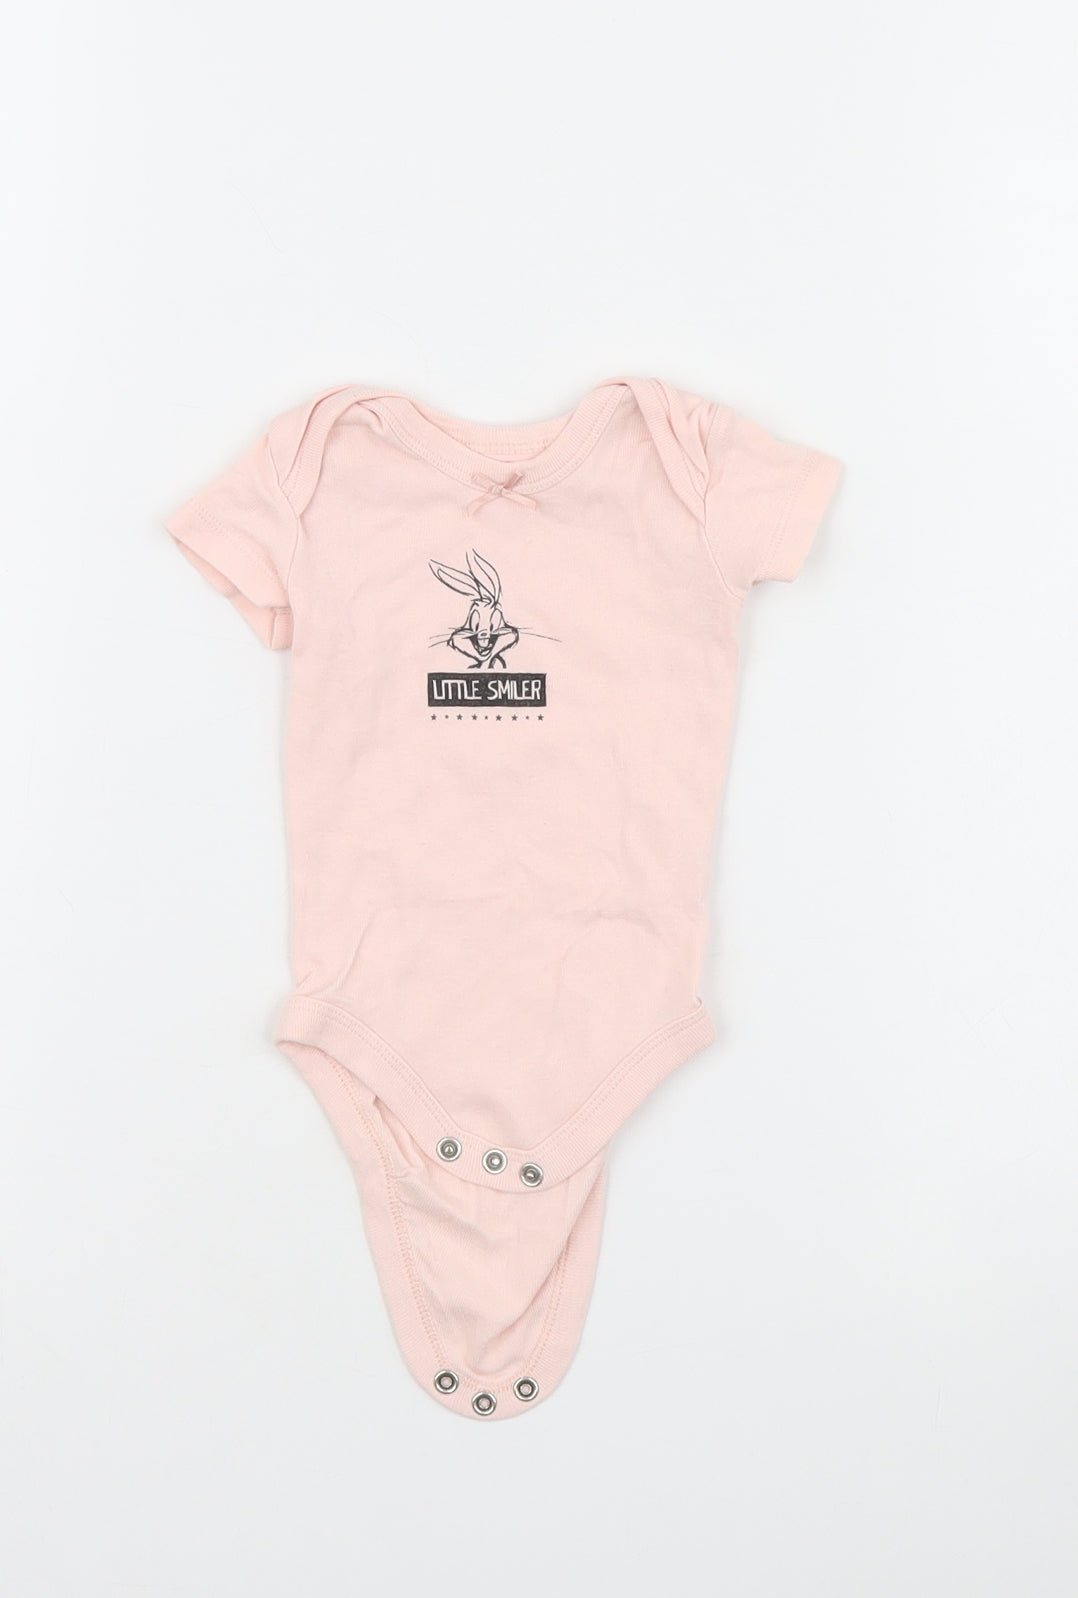 Looney Toons Girls Pink   Babygrow One-Piece Size 0-3 Months